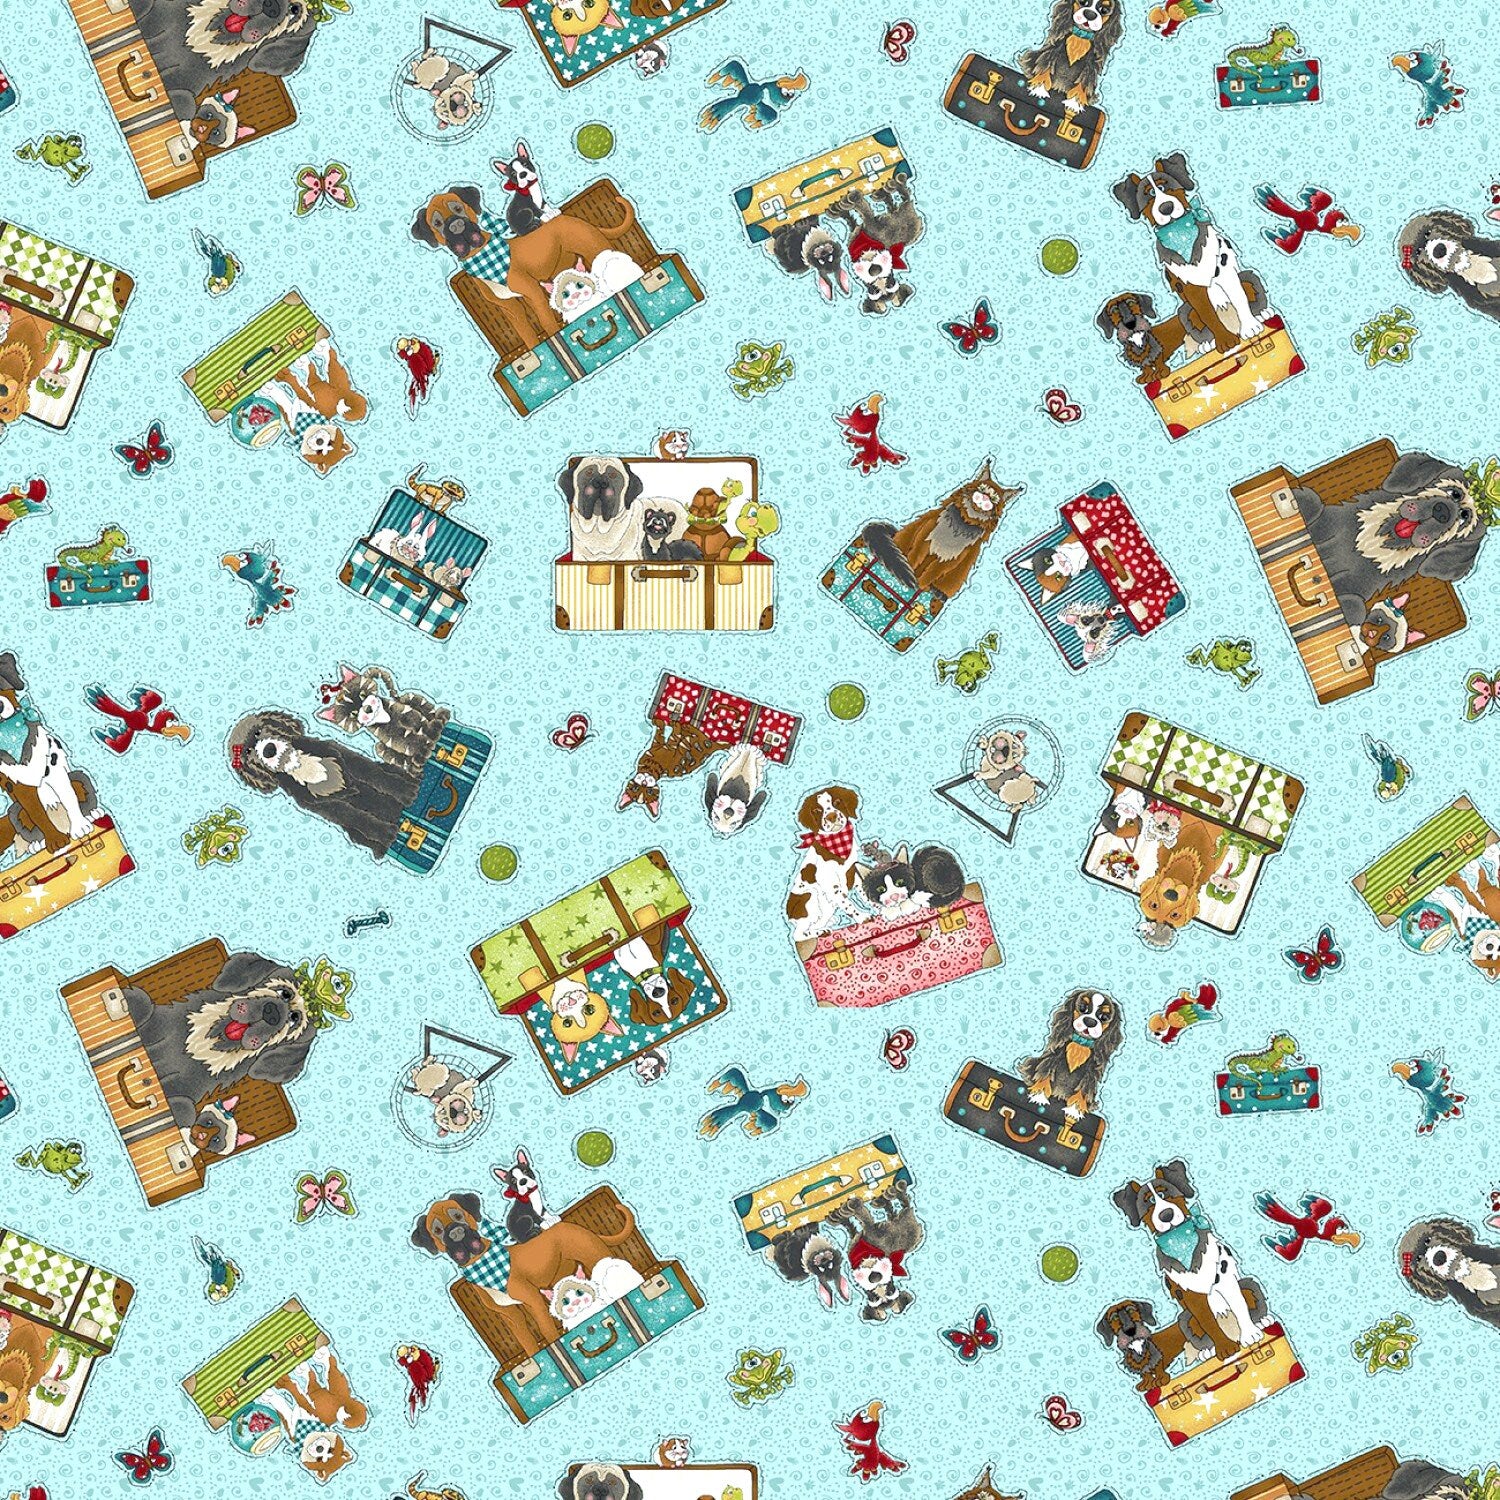 Animal Fabric by the yard - Next Stop Home - Pets in Suitcases from Henry Glass - 100% Cotton Fabric - rescue dog fabric - SHIPS NEXT DAY